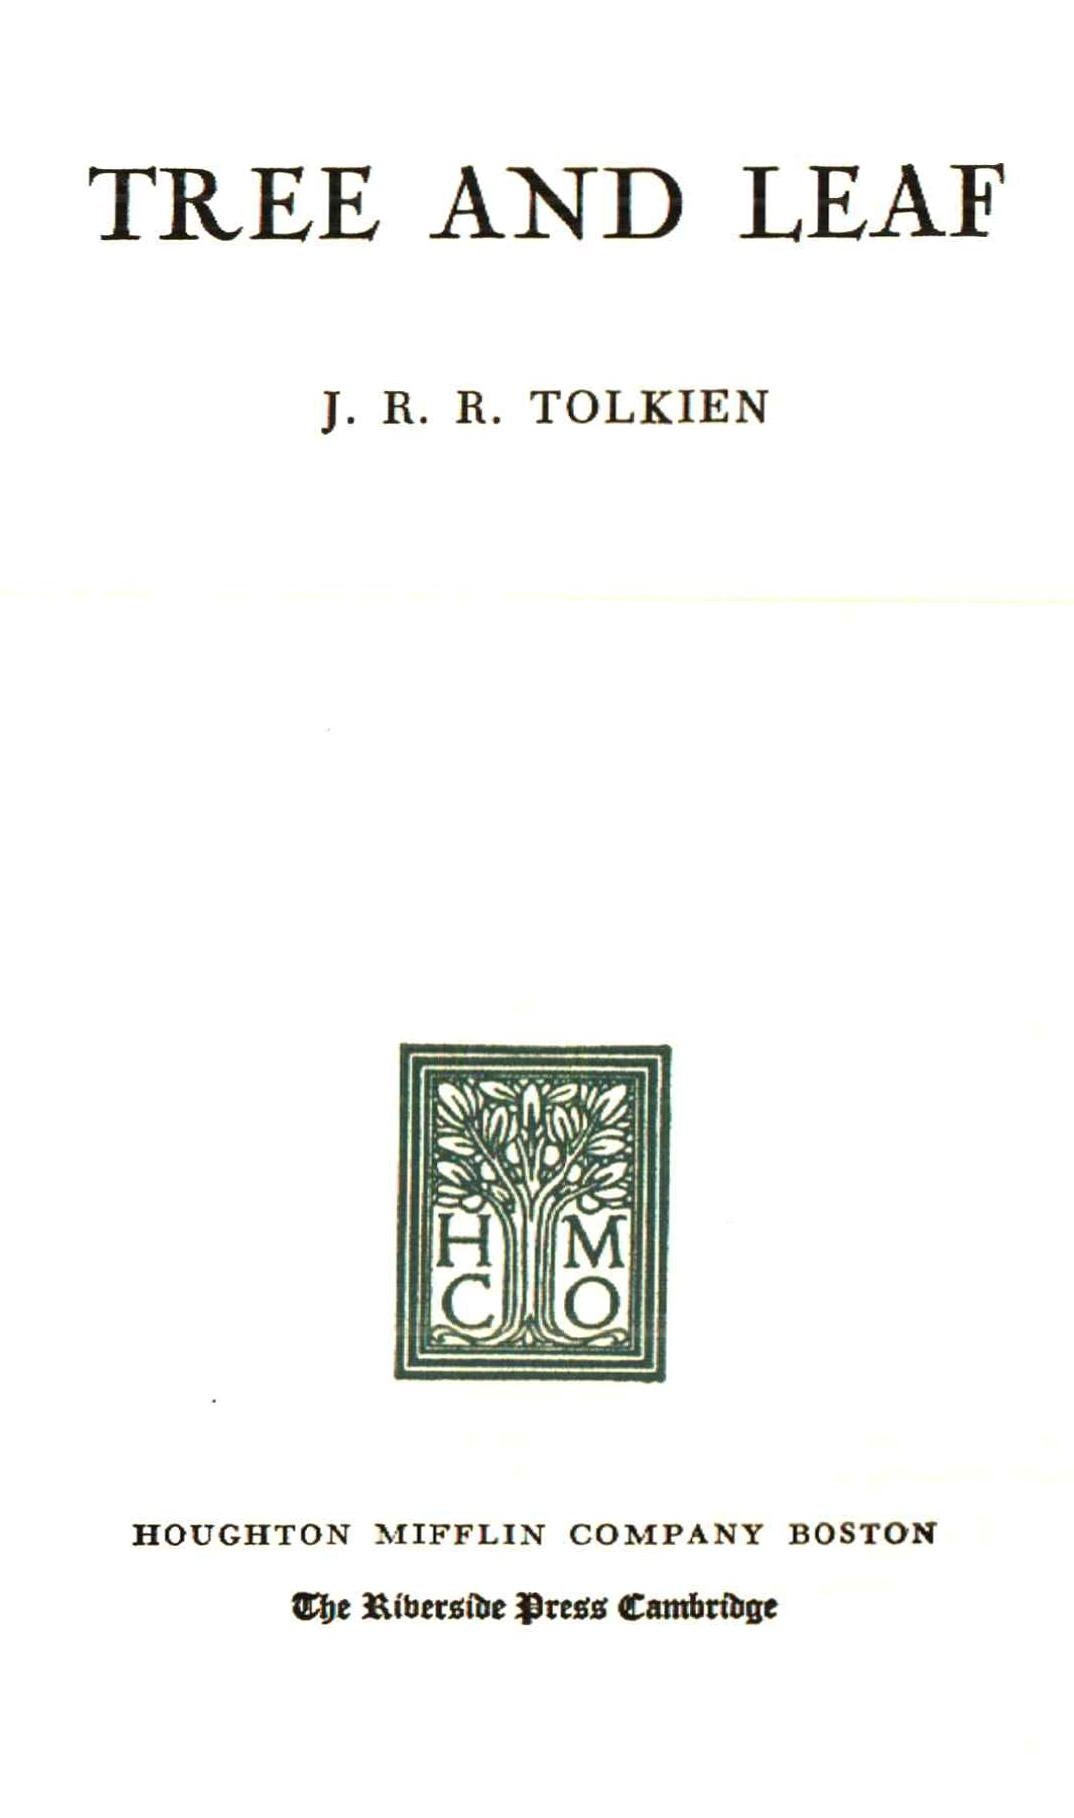 American J. R. R. Tolkien's Tree and Leaf, 1965 For Sale